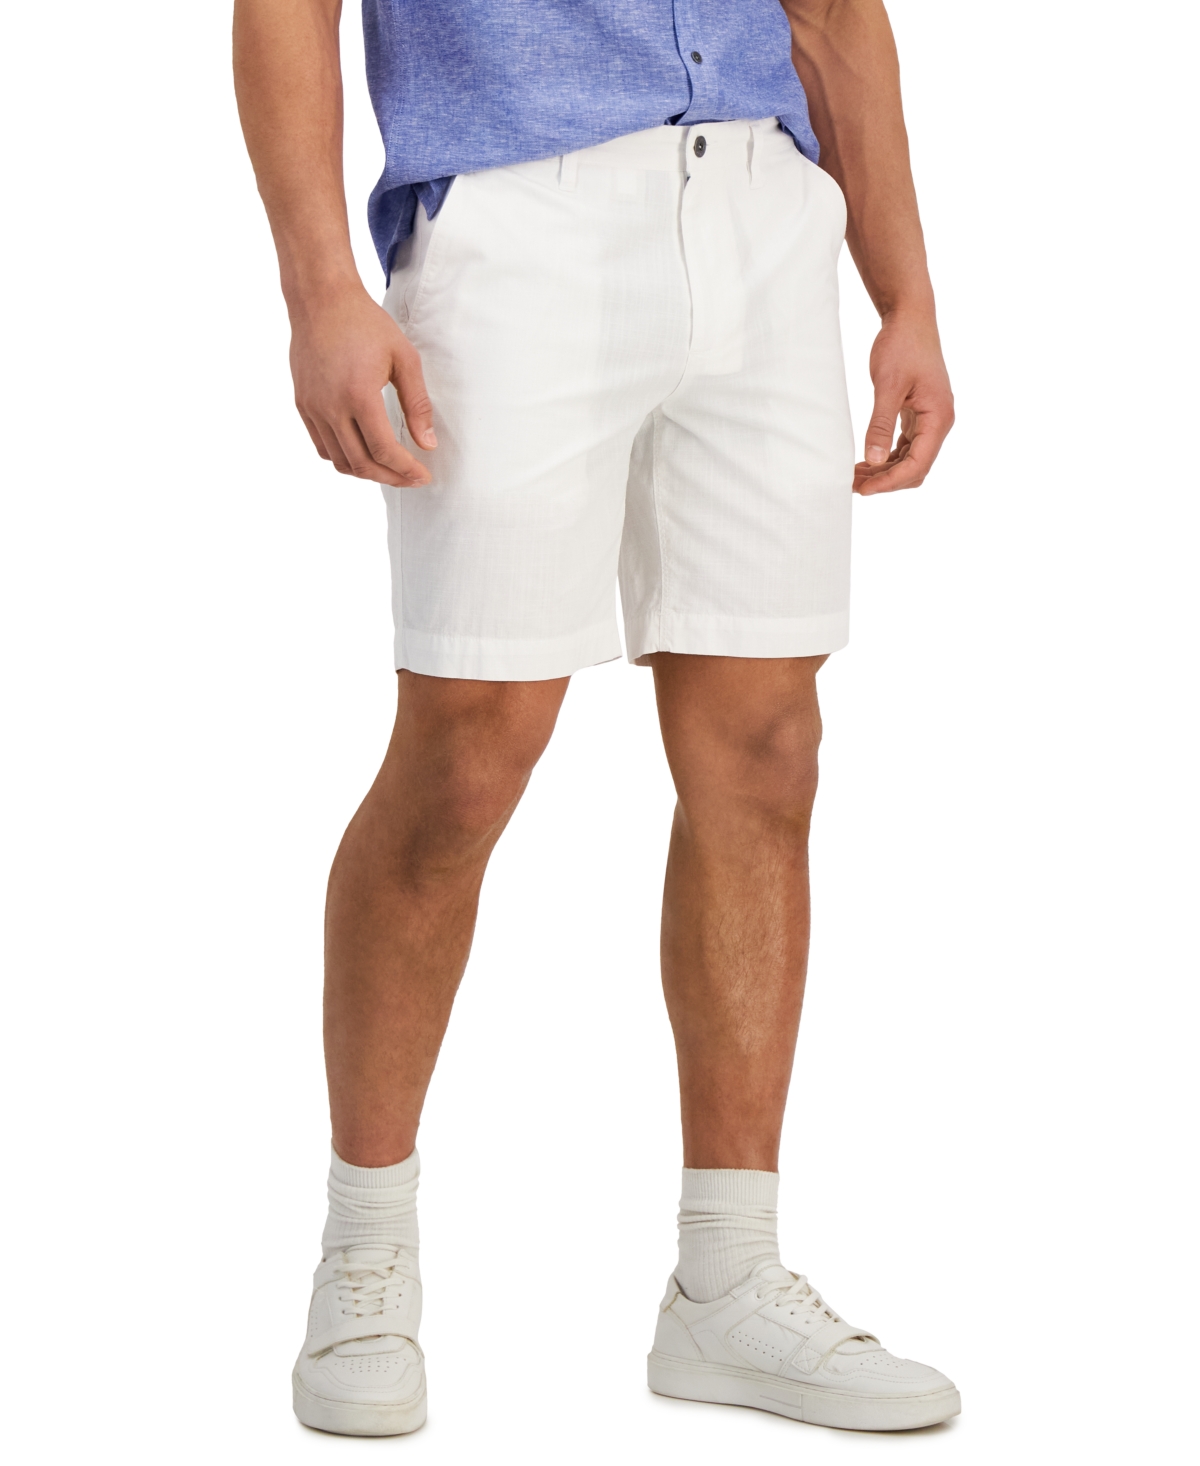 Classic-Fit Solid 8.5" Chambray Shorts, Created for Macy's - Basic Navy